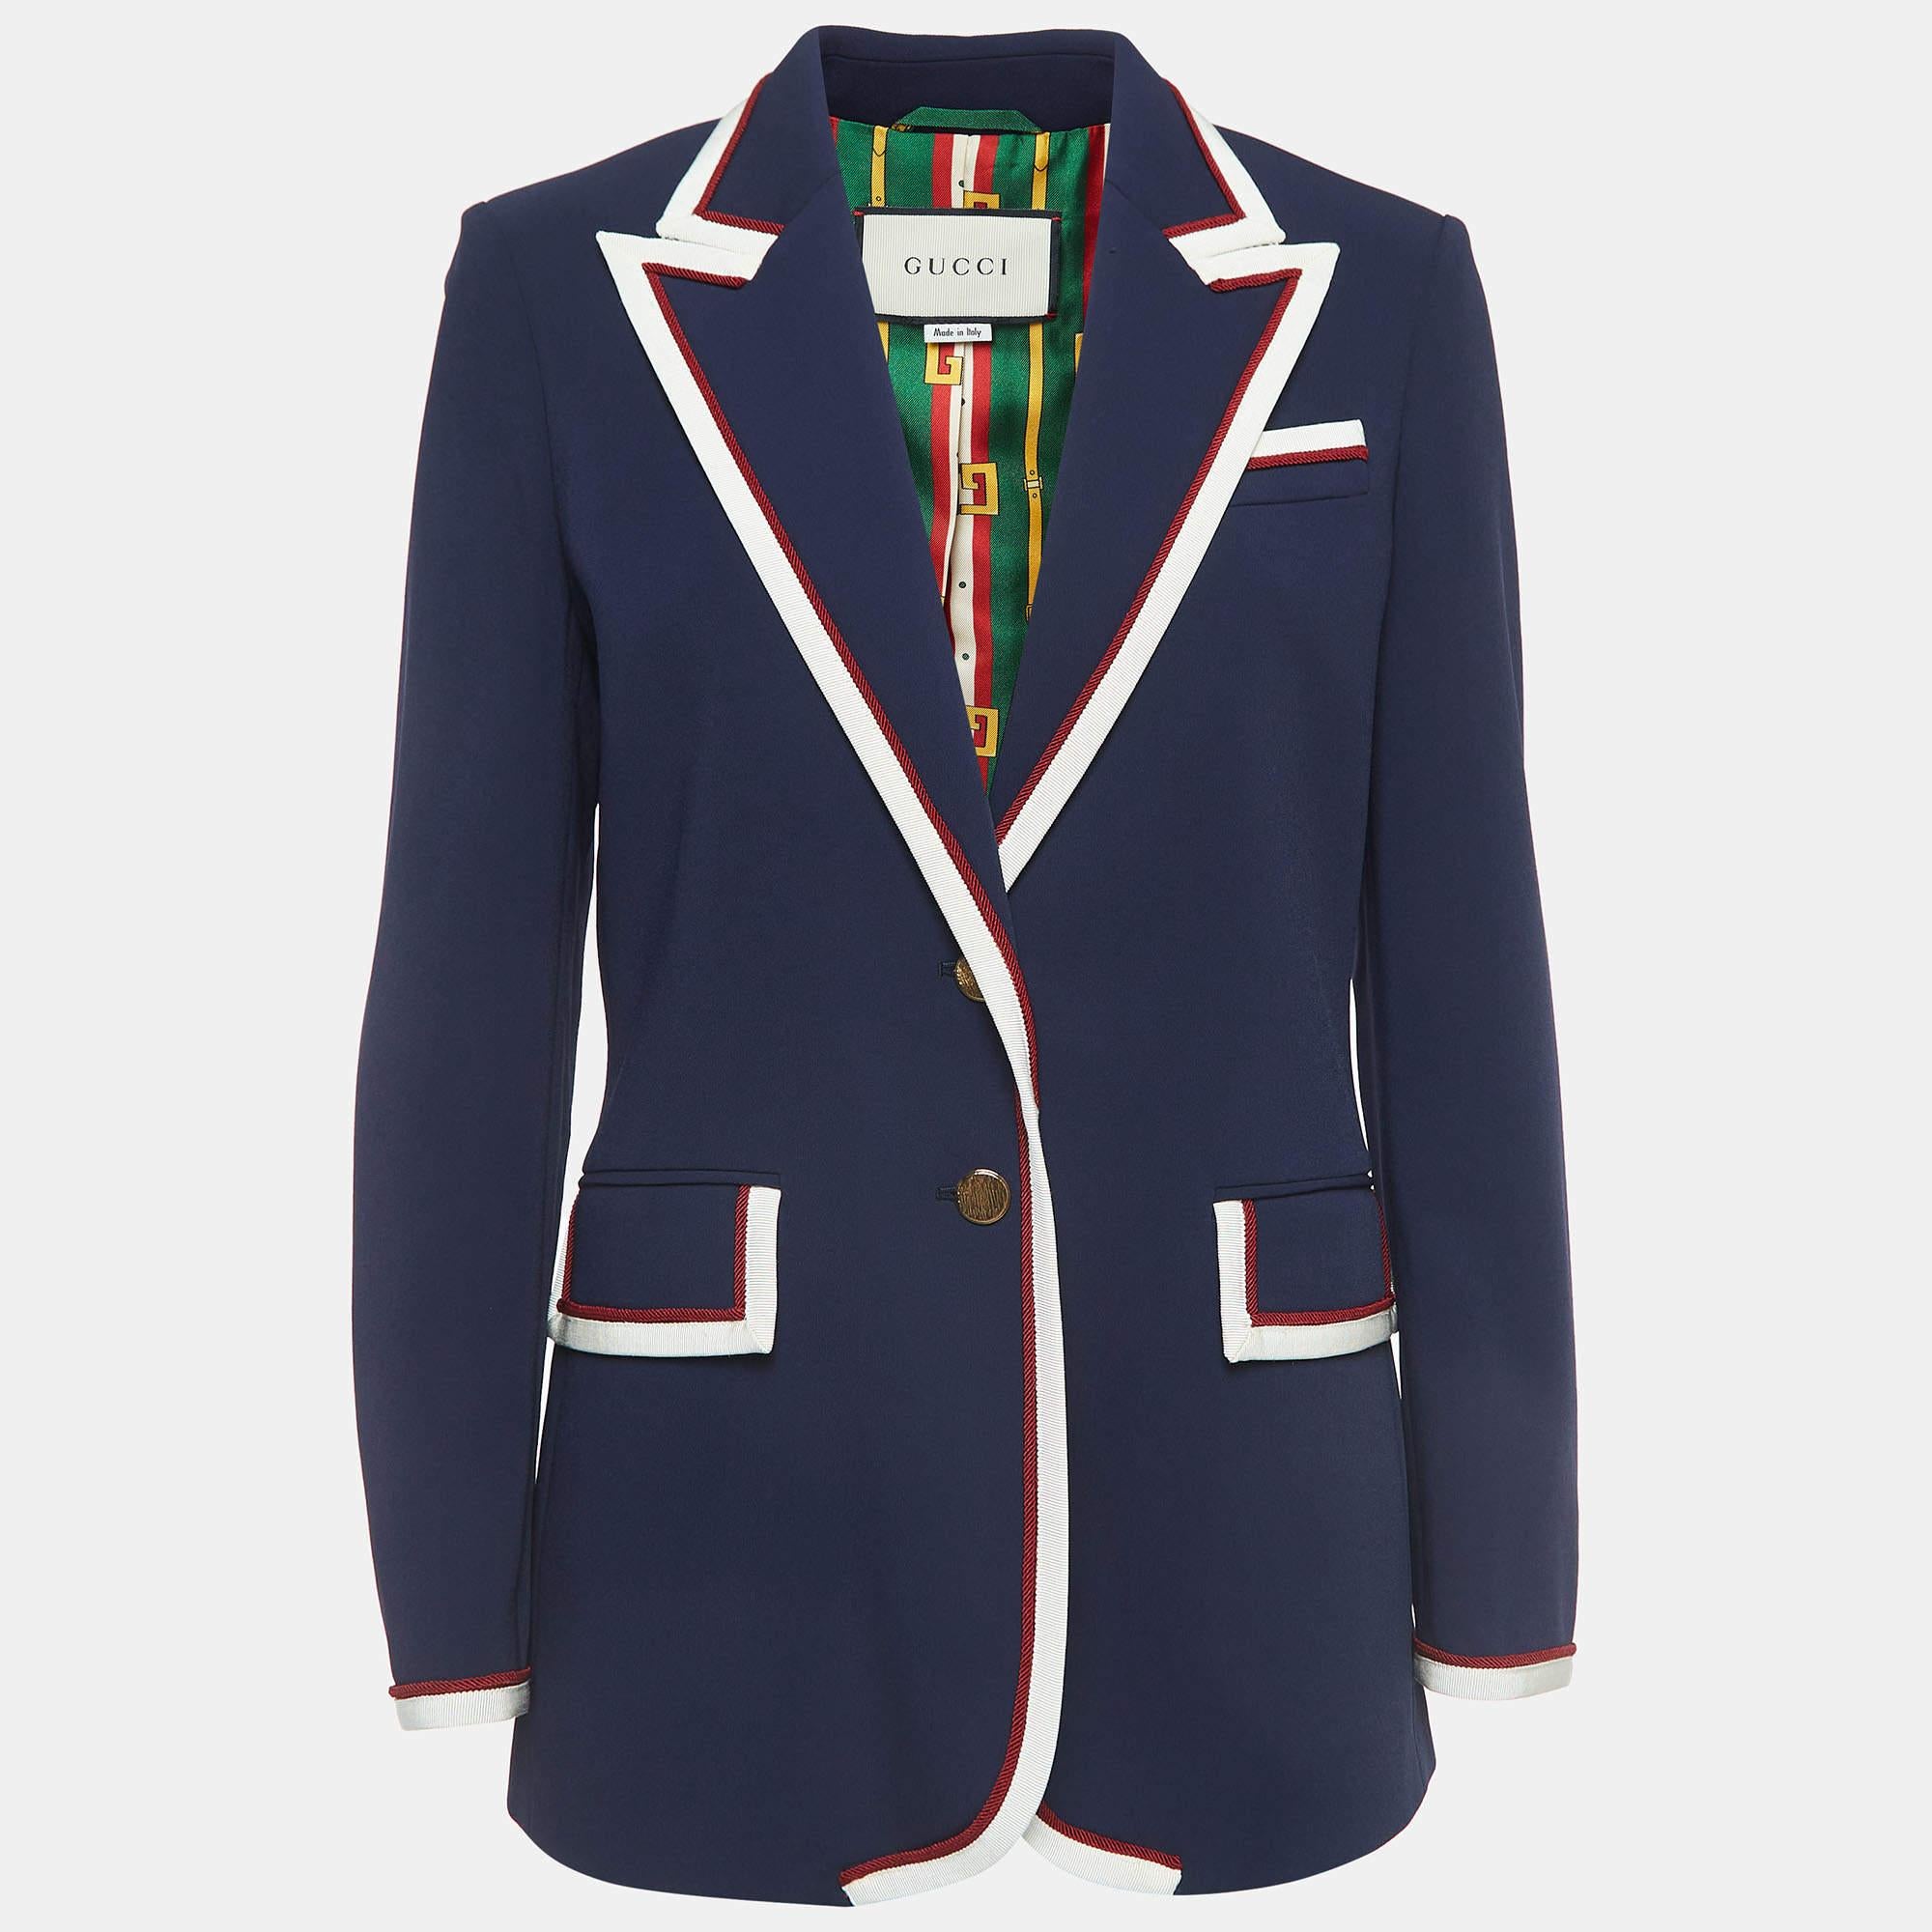 The Gucci blazer exudes sophistication with its impeccable tailoring and luxurious crepe fabric. Featuring striking contrast trim detailing and a refined button front closure, it effortlessly merges timeless elegance with contemporary style.

